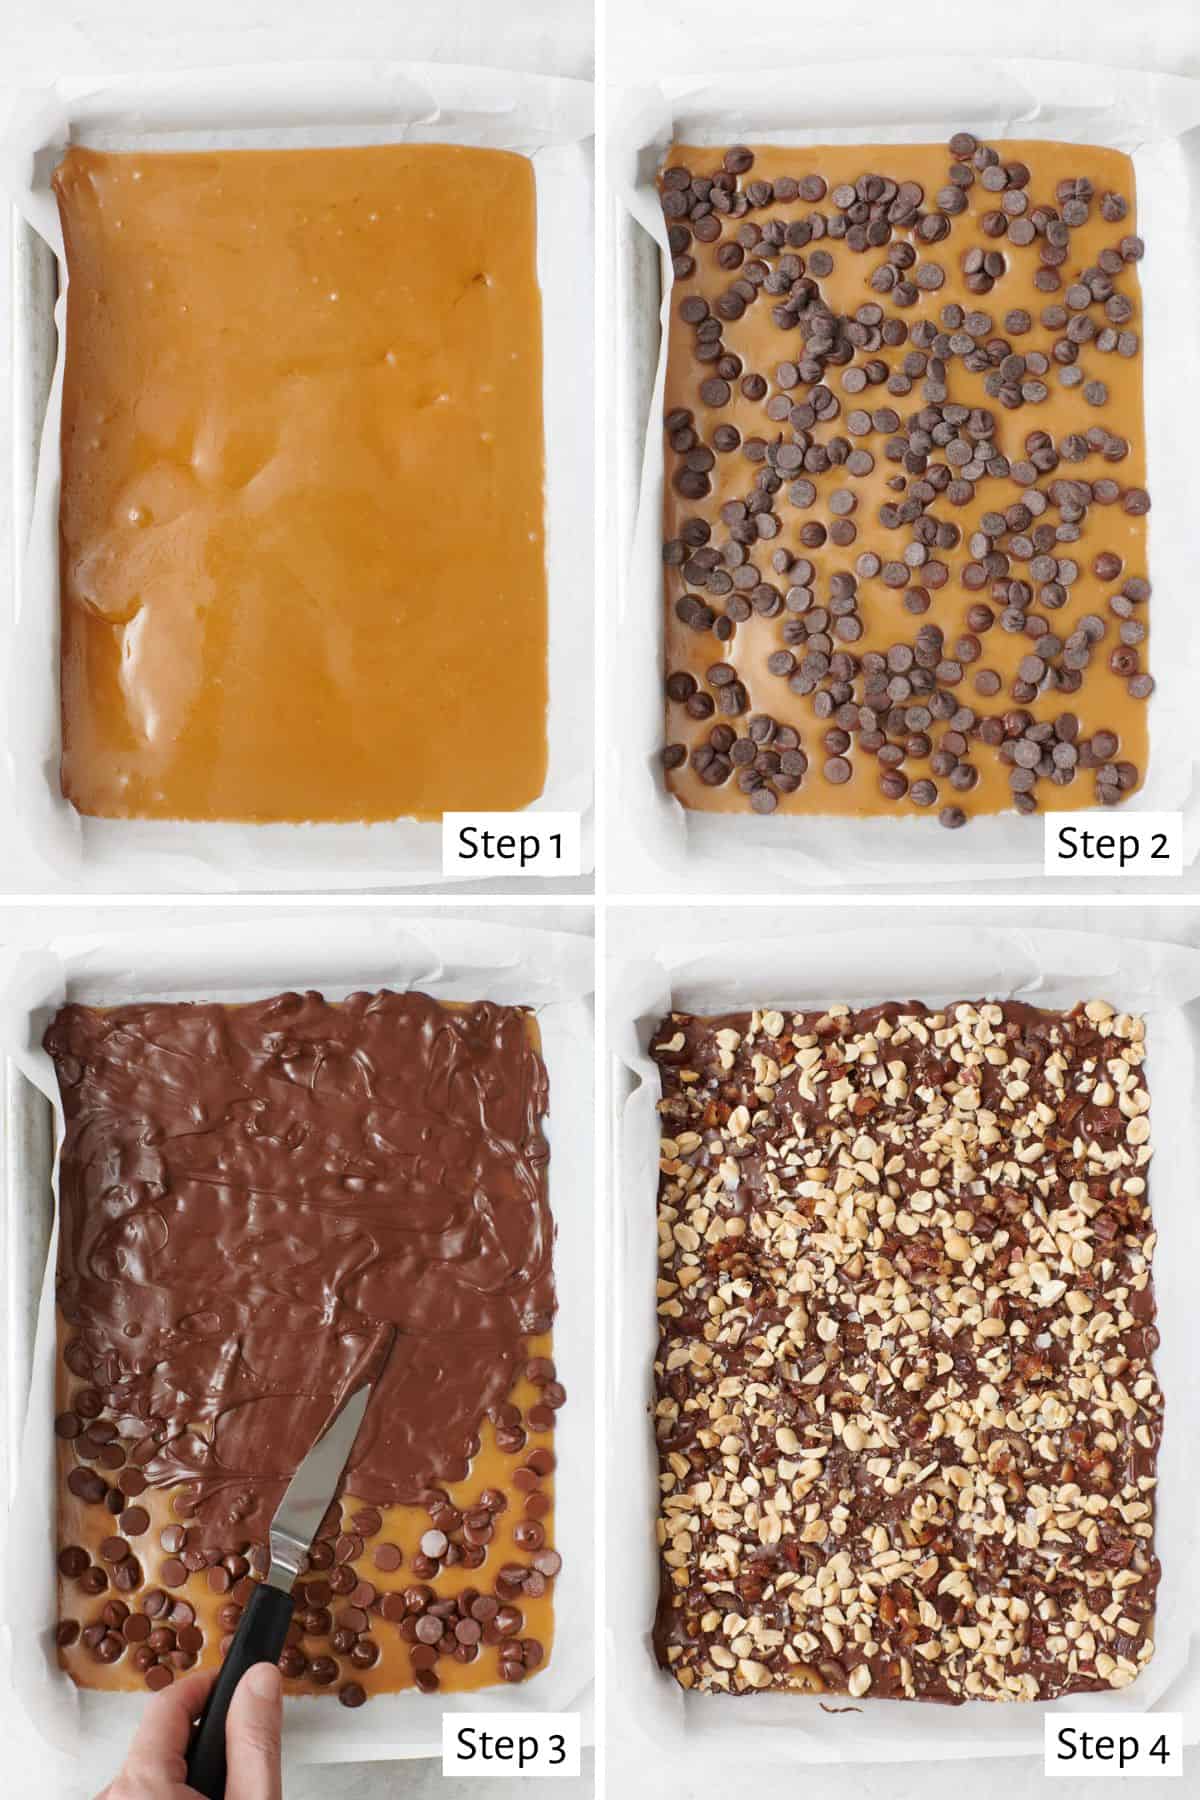 4 image collage building layers of ingredients: 1- toffee spread out on a parchment lined sheet pan, 2- chocolate chips scattered on warm toffee, 3- knifes spreading melted chocolate over toffee, 4- nuts and dates sprinkled on top.